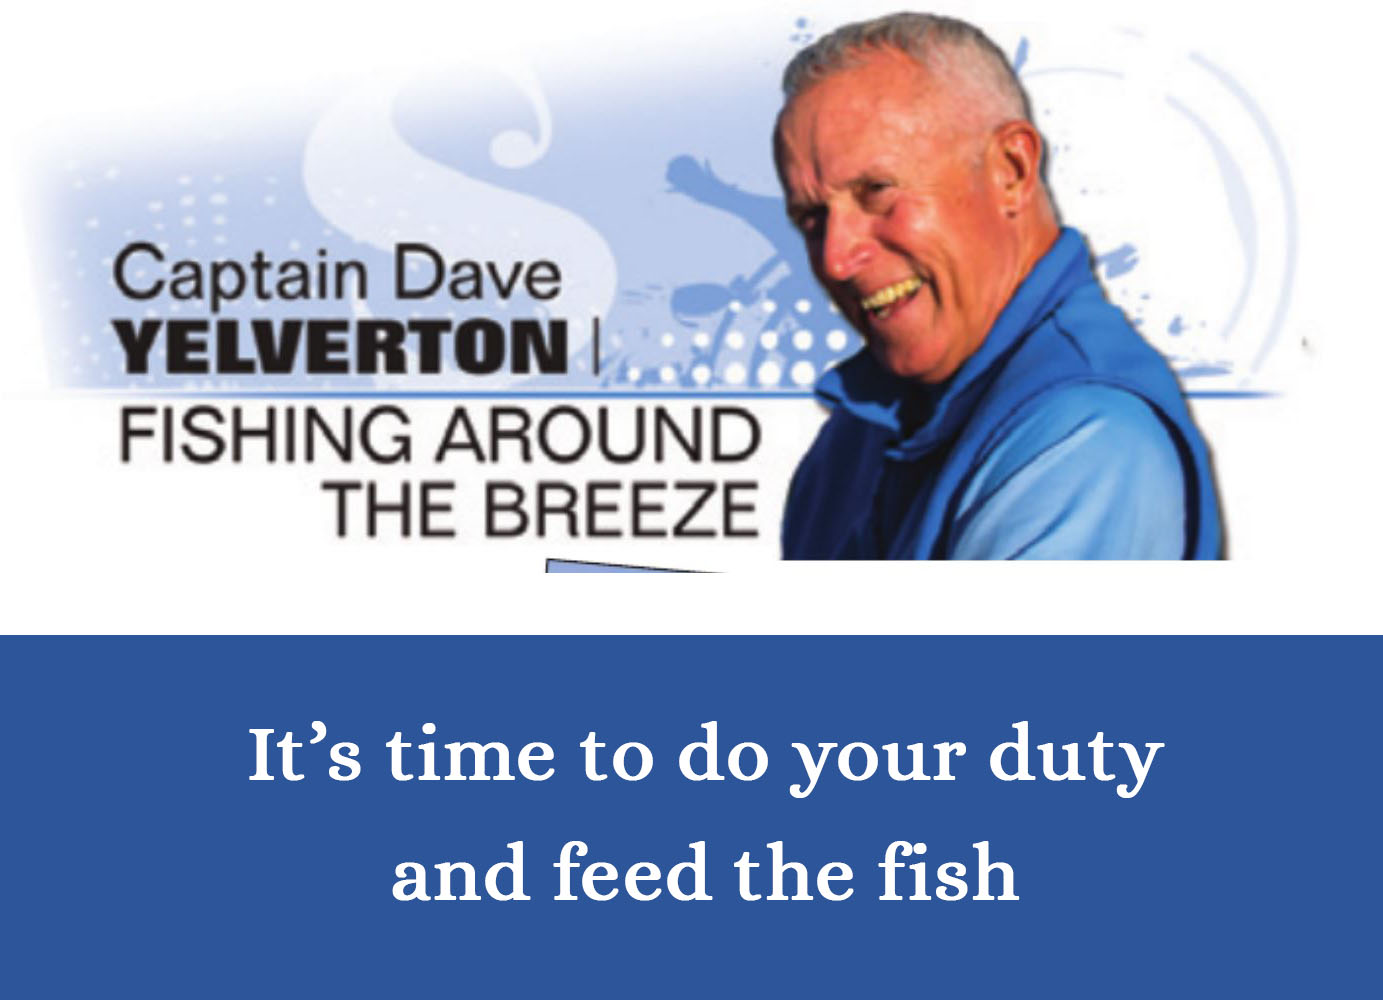 2021-04-Splash!Magazine Article - It's time to do your duty and feed the fish - with Capt Dave Yelverton